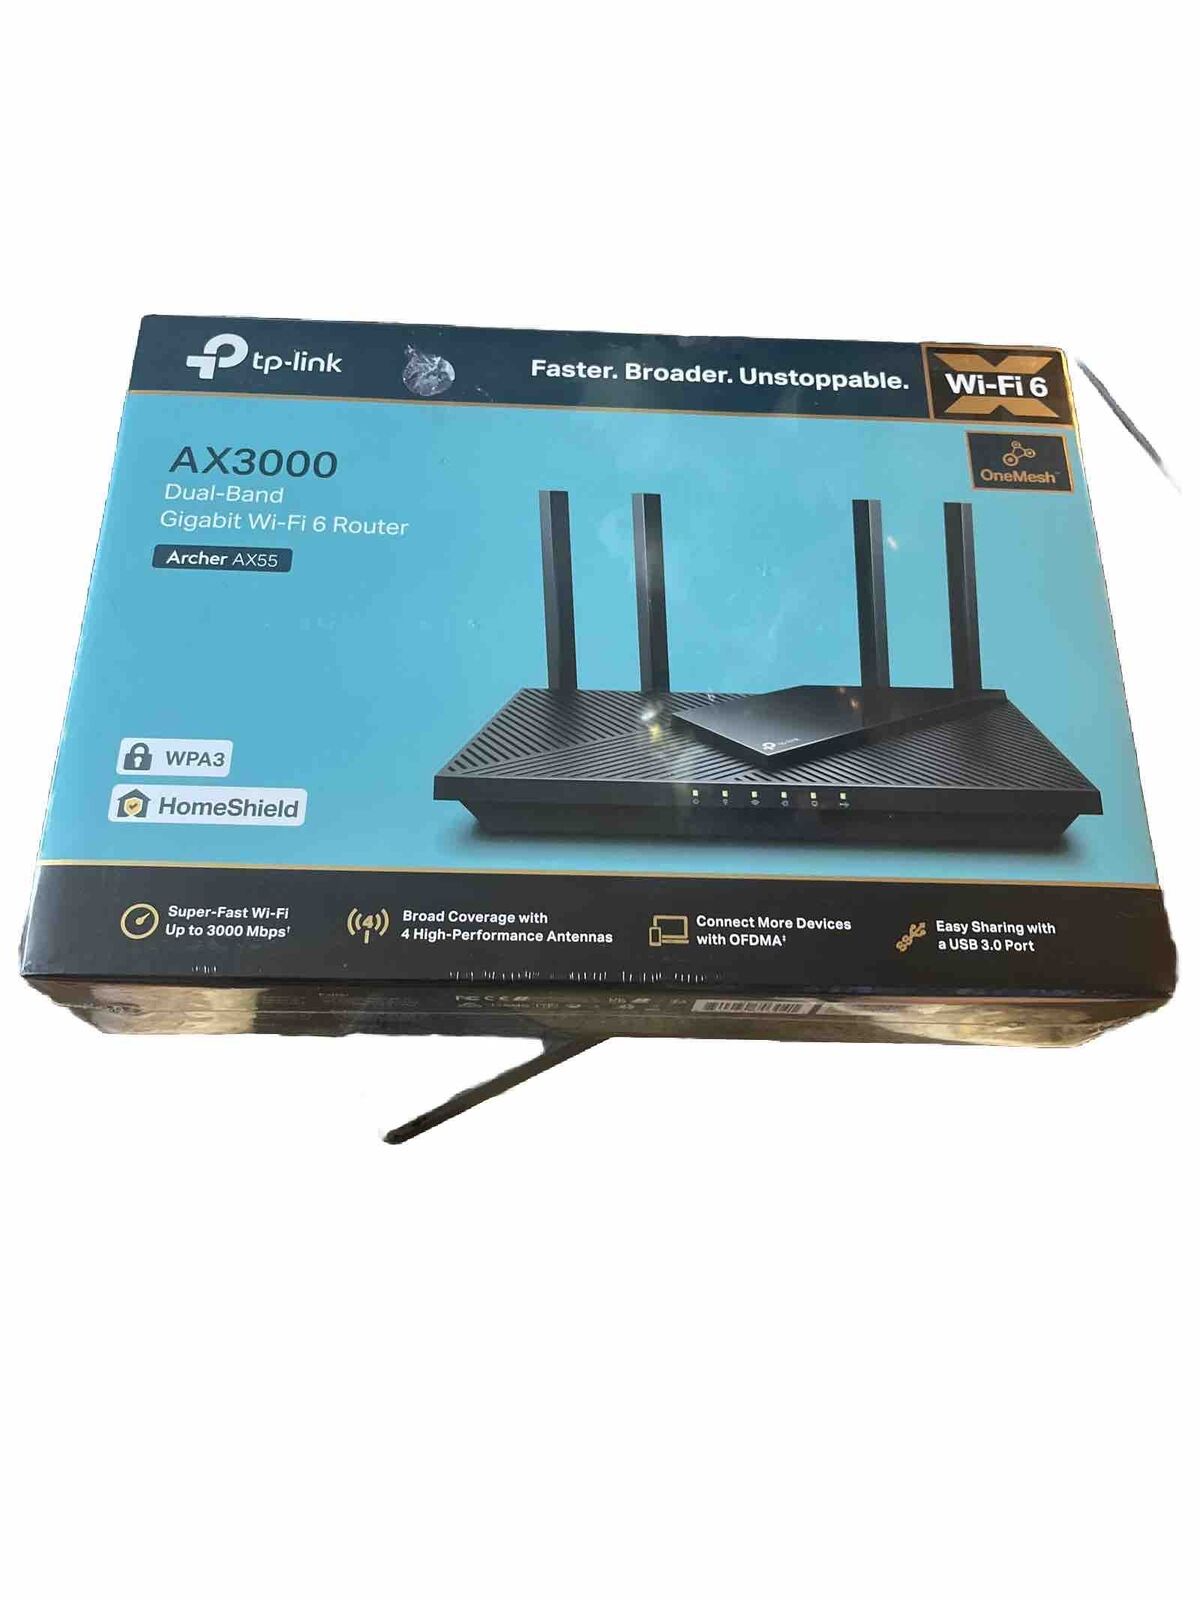 TP-Link AX3000 Dual-Band Gigabit Wi-Fi 6 Router - Archer AX55 *New*